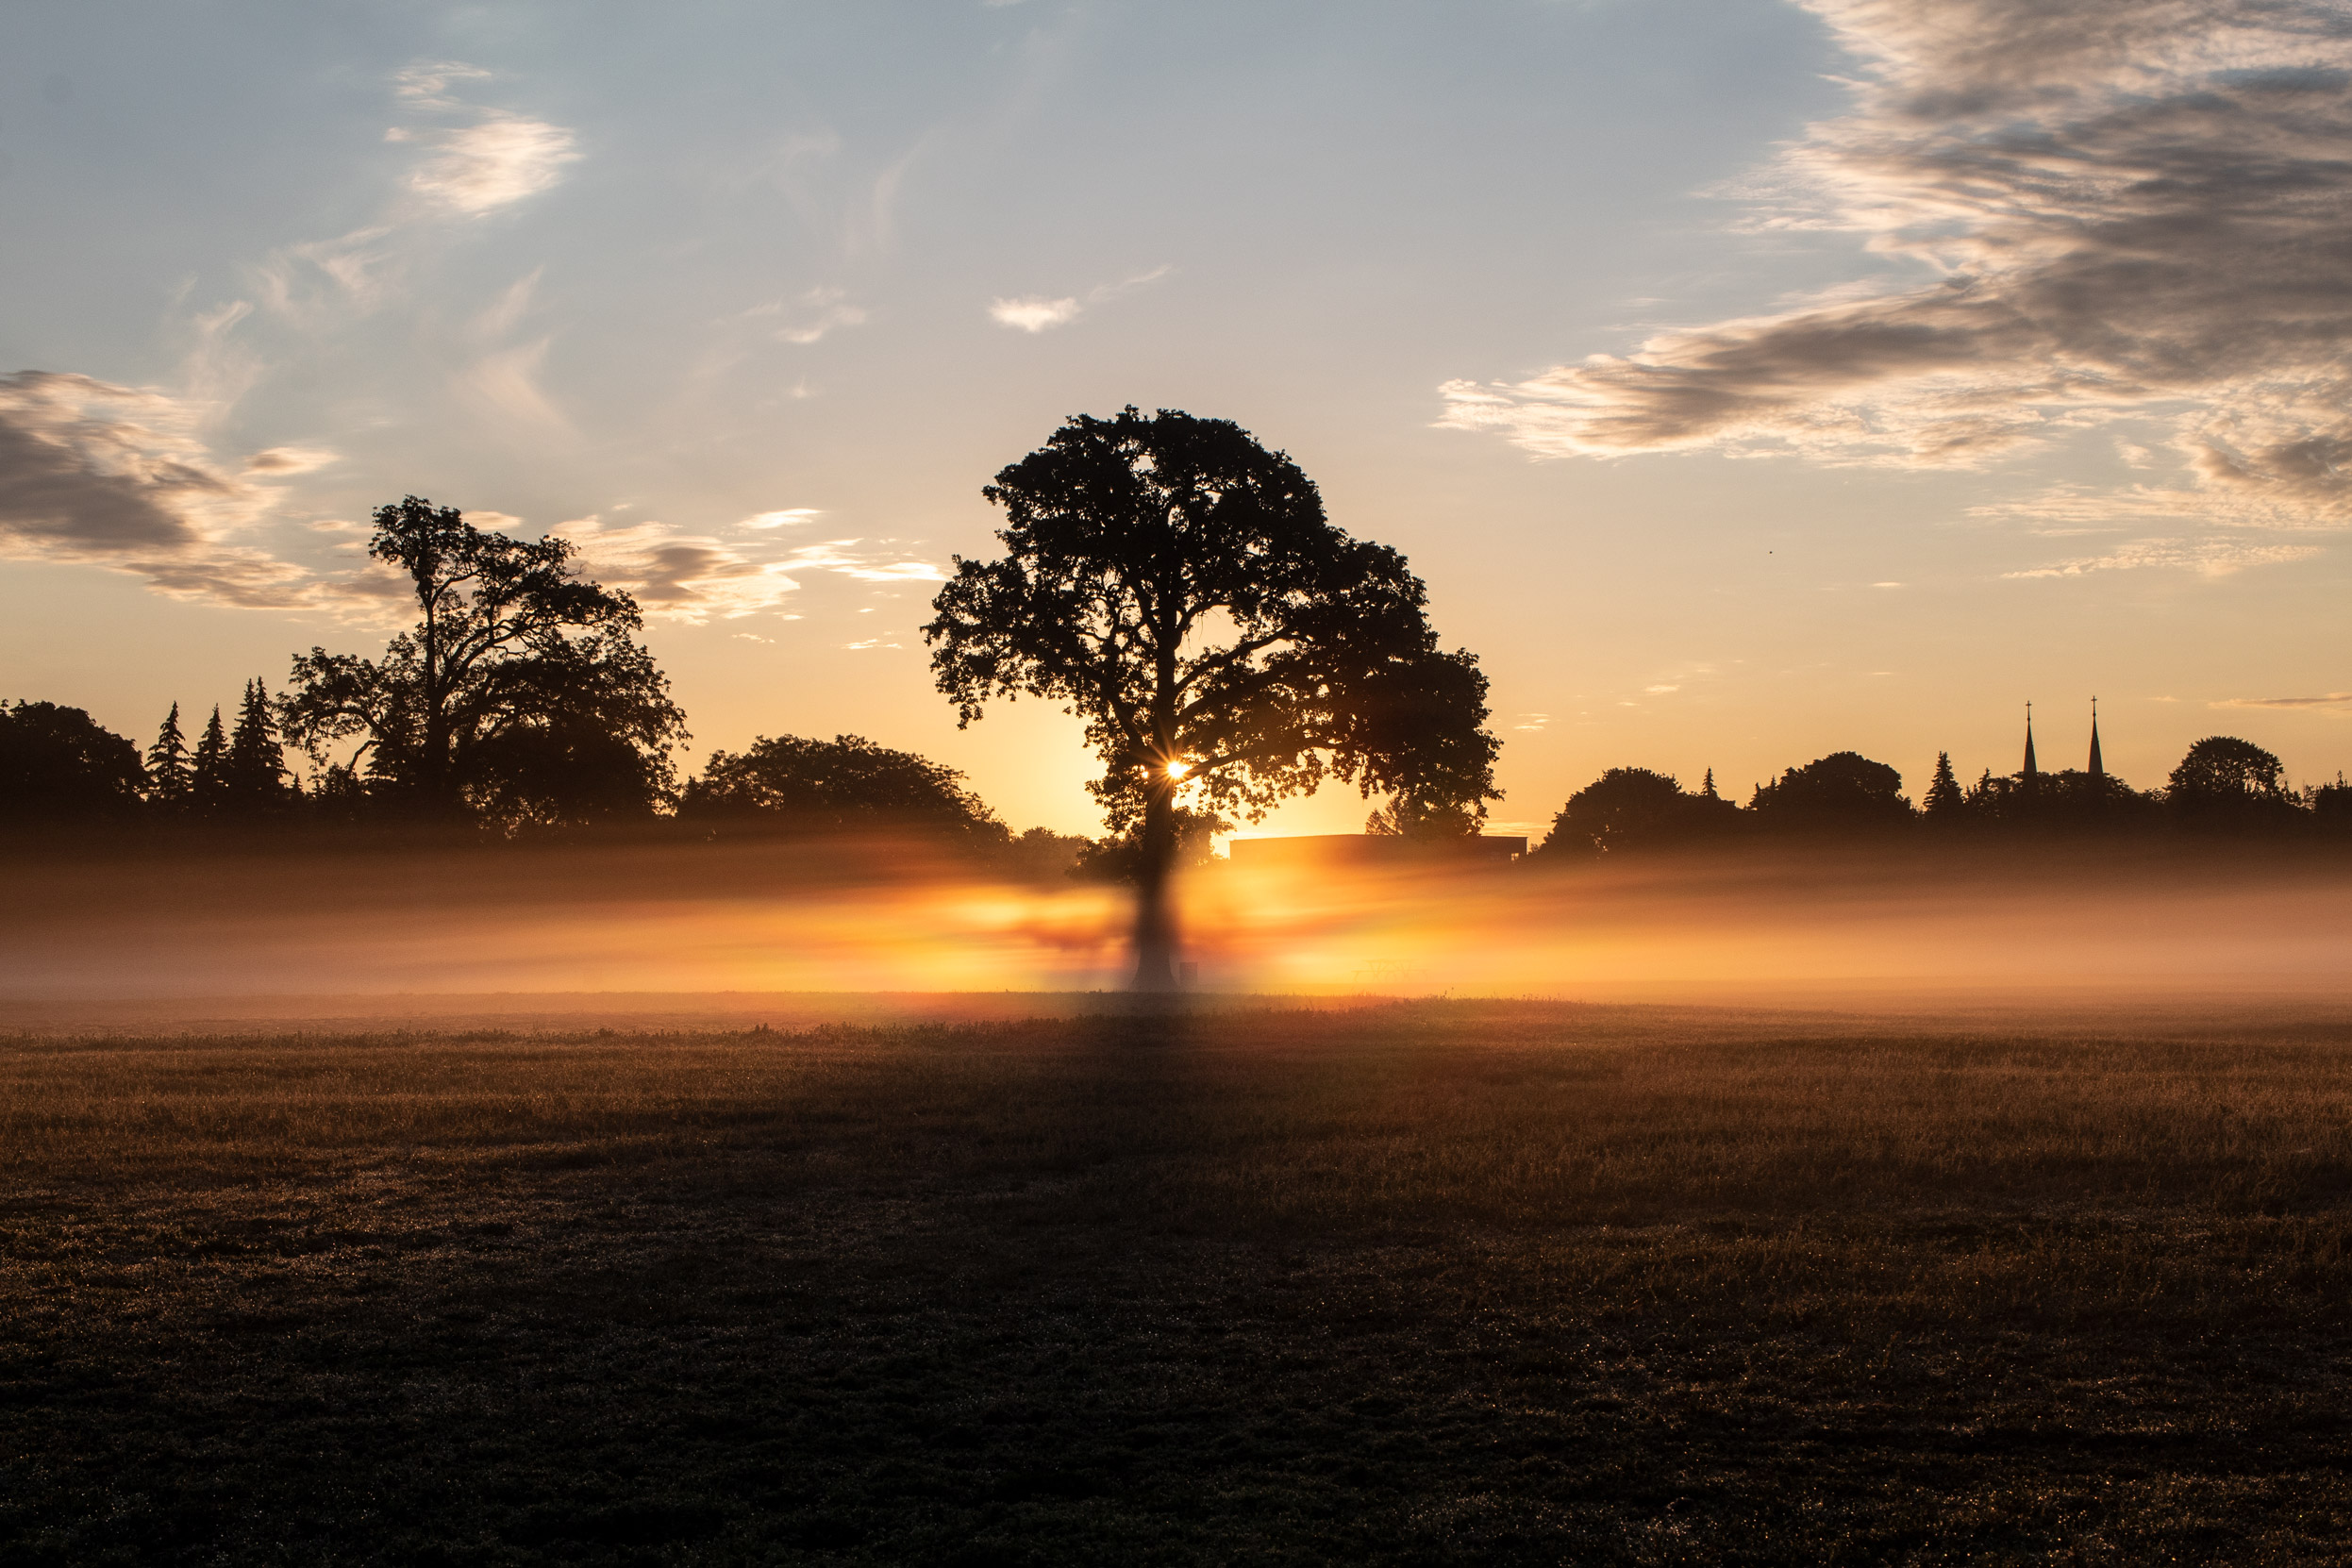 Tree on a field surrounded by fog. The sun is rising behind the tree, turning the fog various hues of orange, yellow, and red